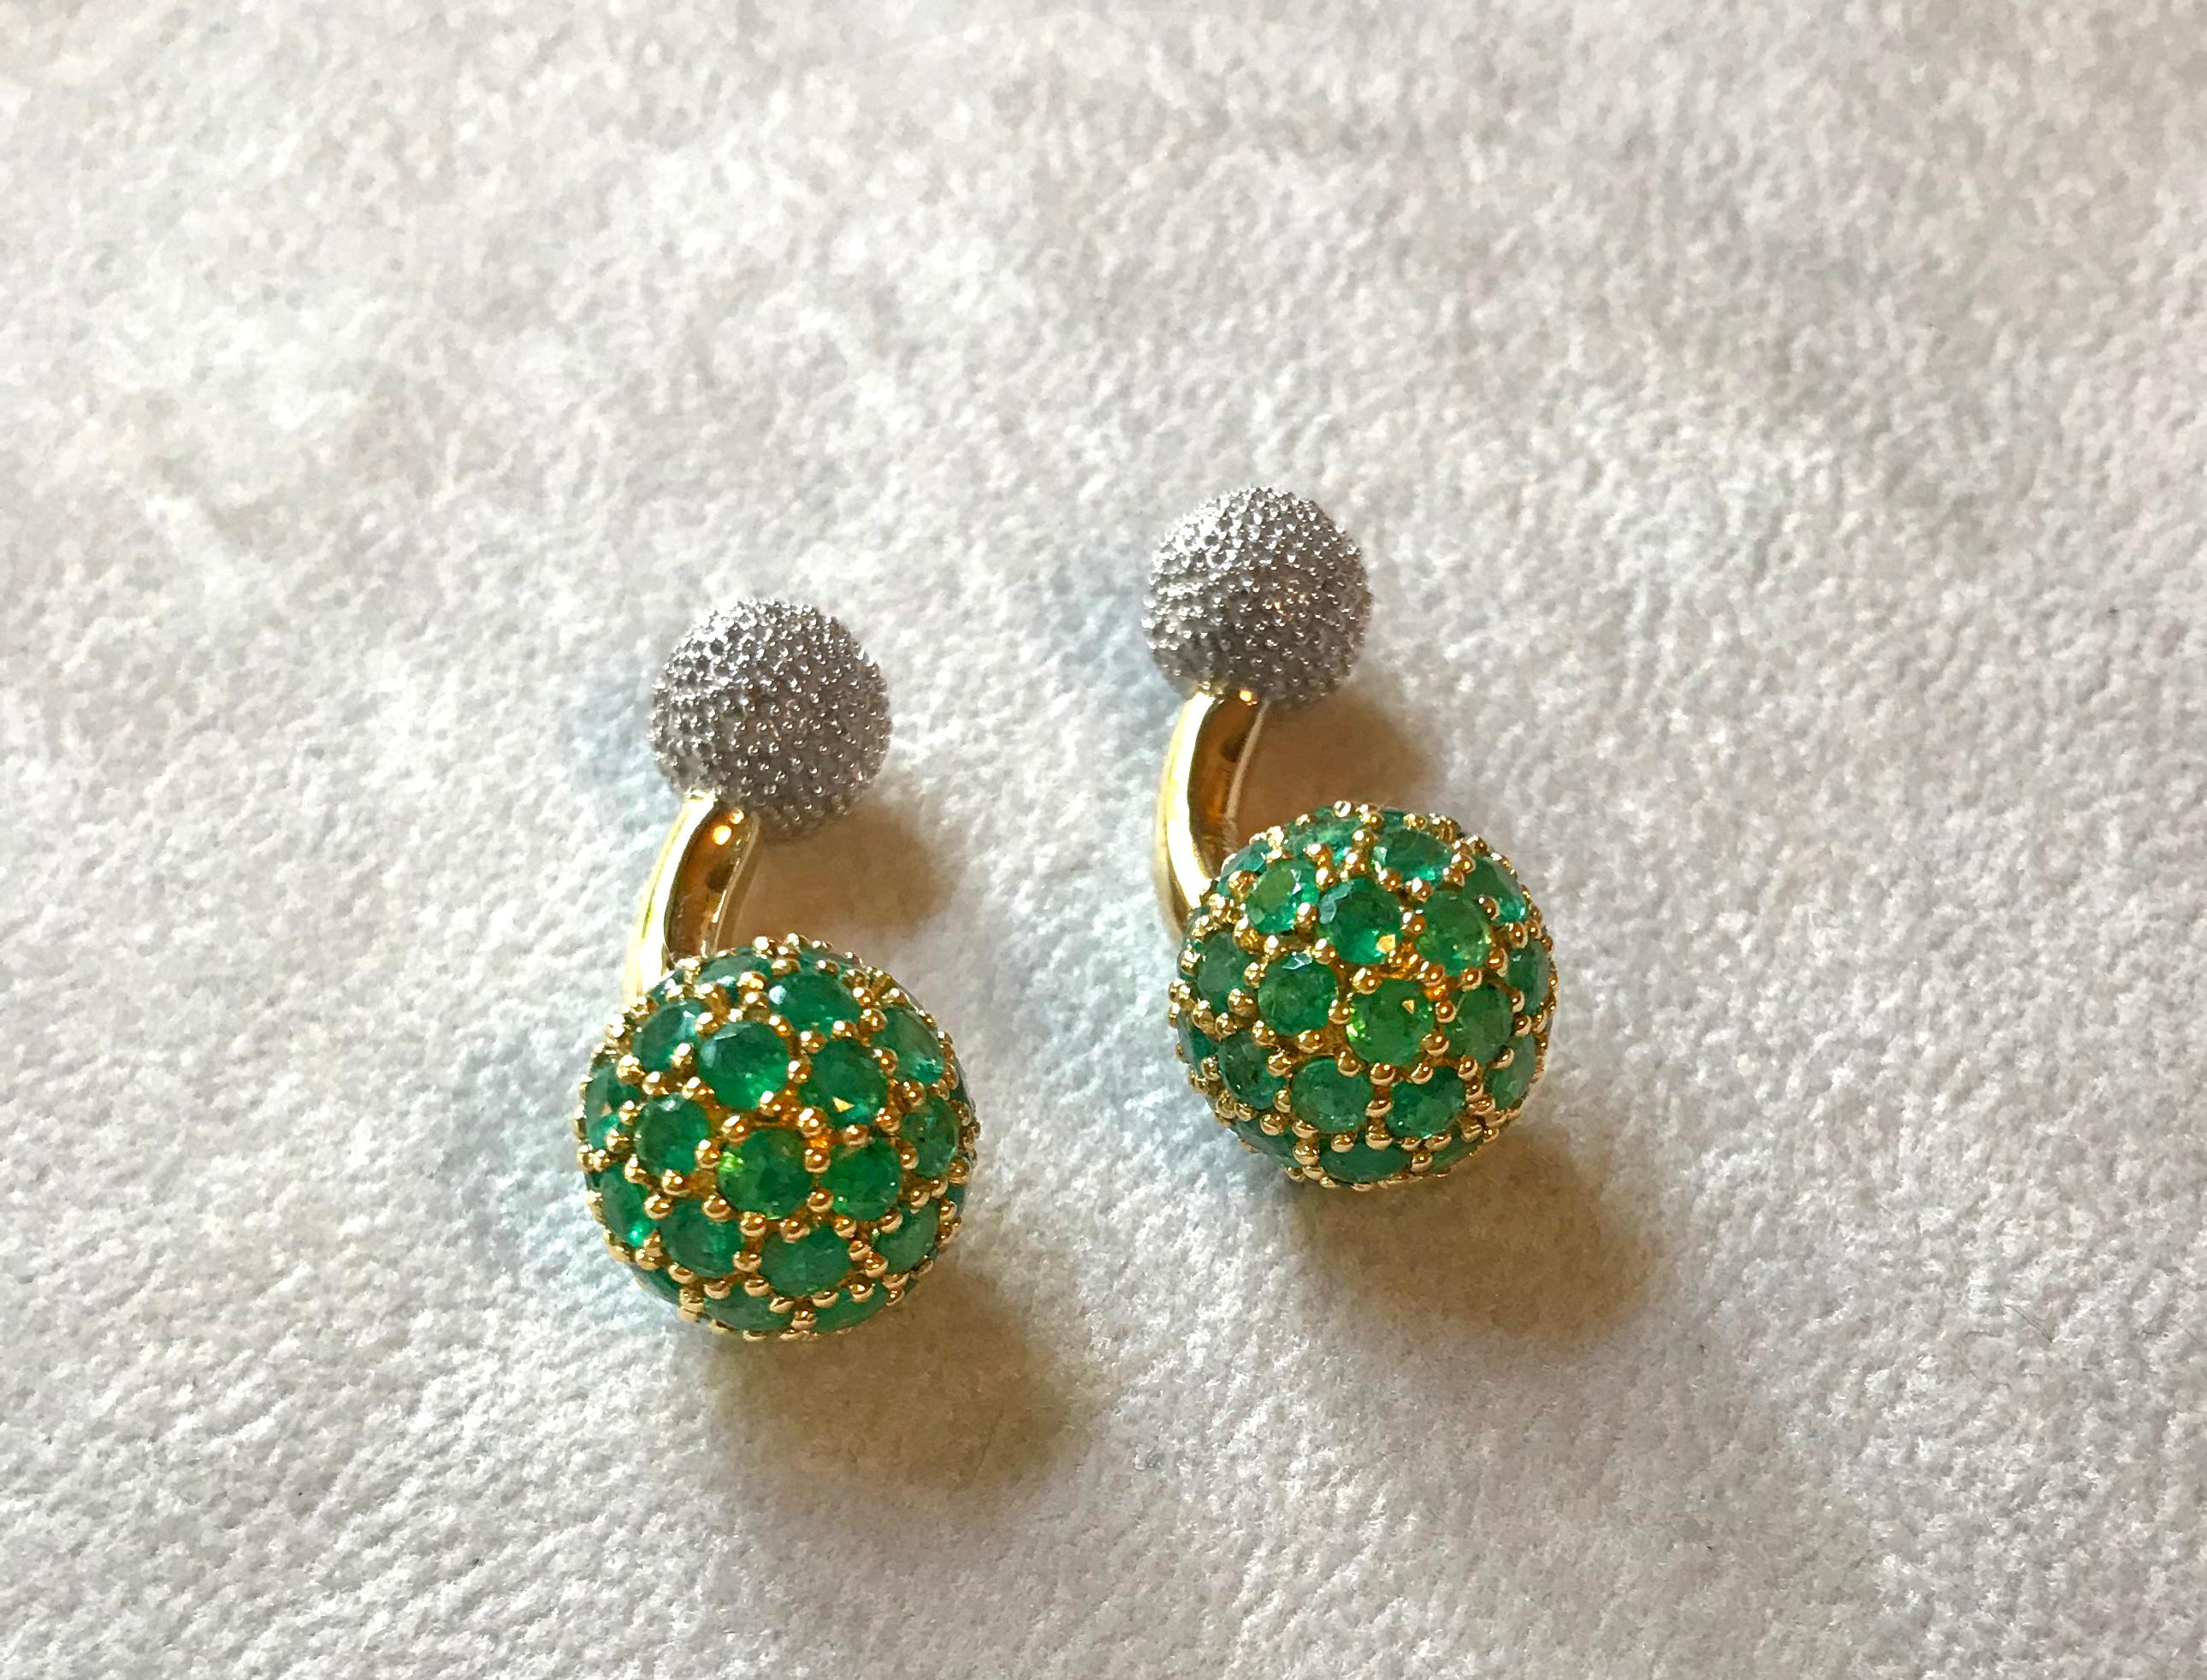 These elegant cufflinks are made in 18k gold , the large spherical front face is completely covered in emeralds, while the toggle is shaped as a smaller sphere with a multi-faceted texture made in 18k white gold . A curved post  made in 18k yellow